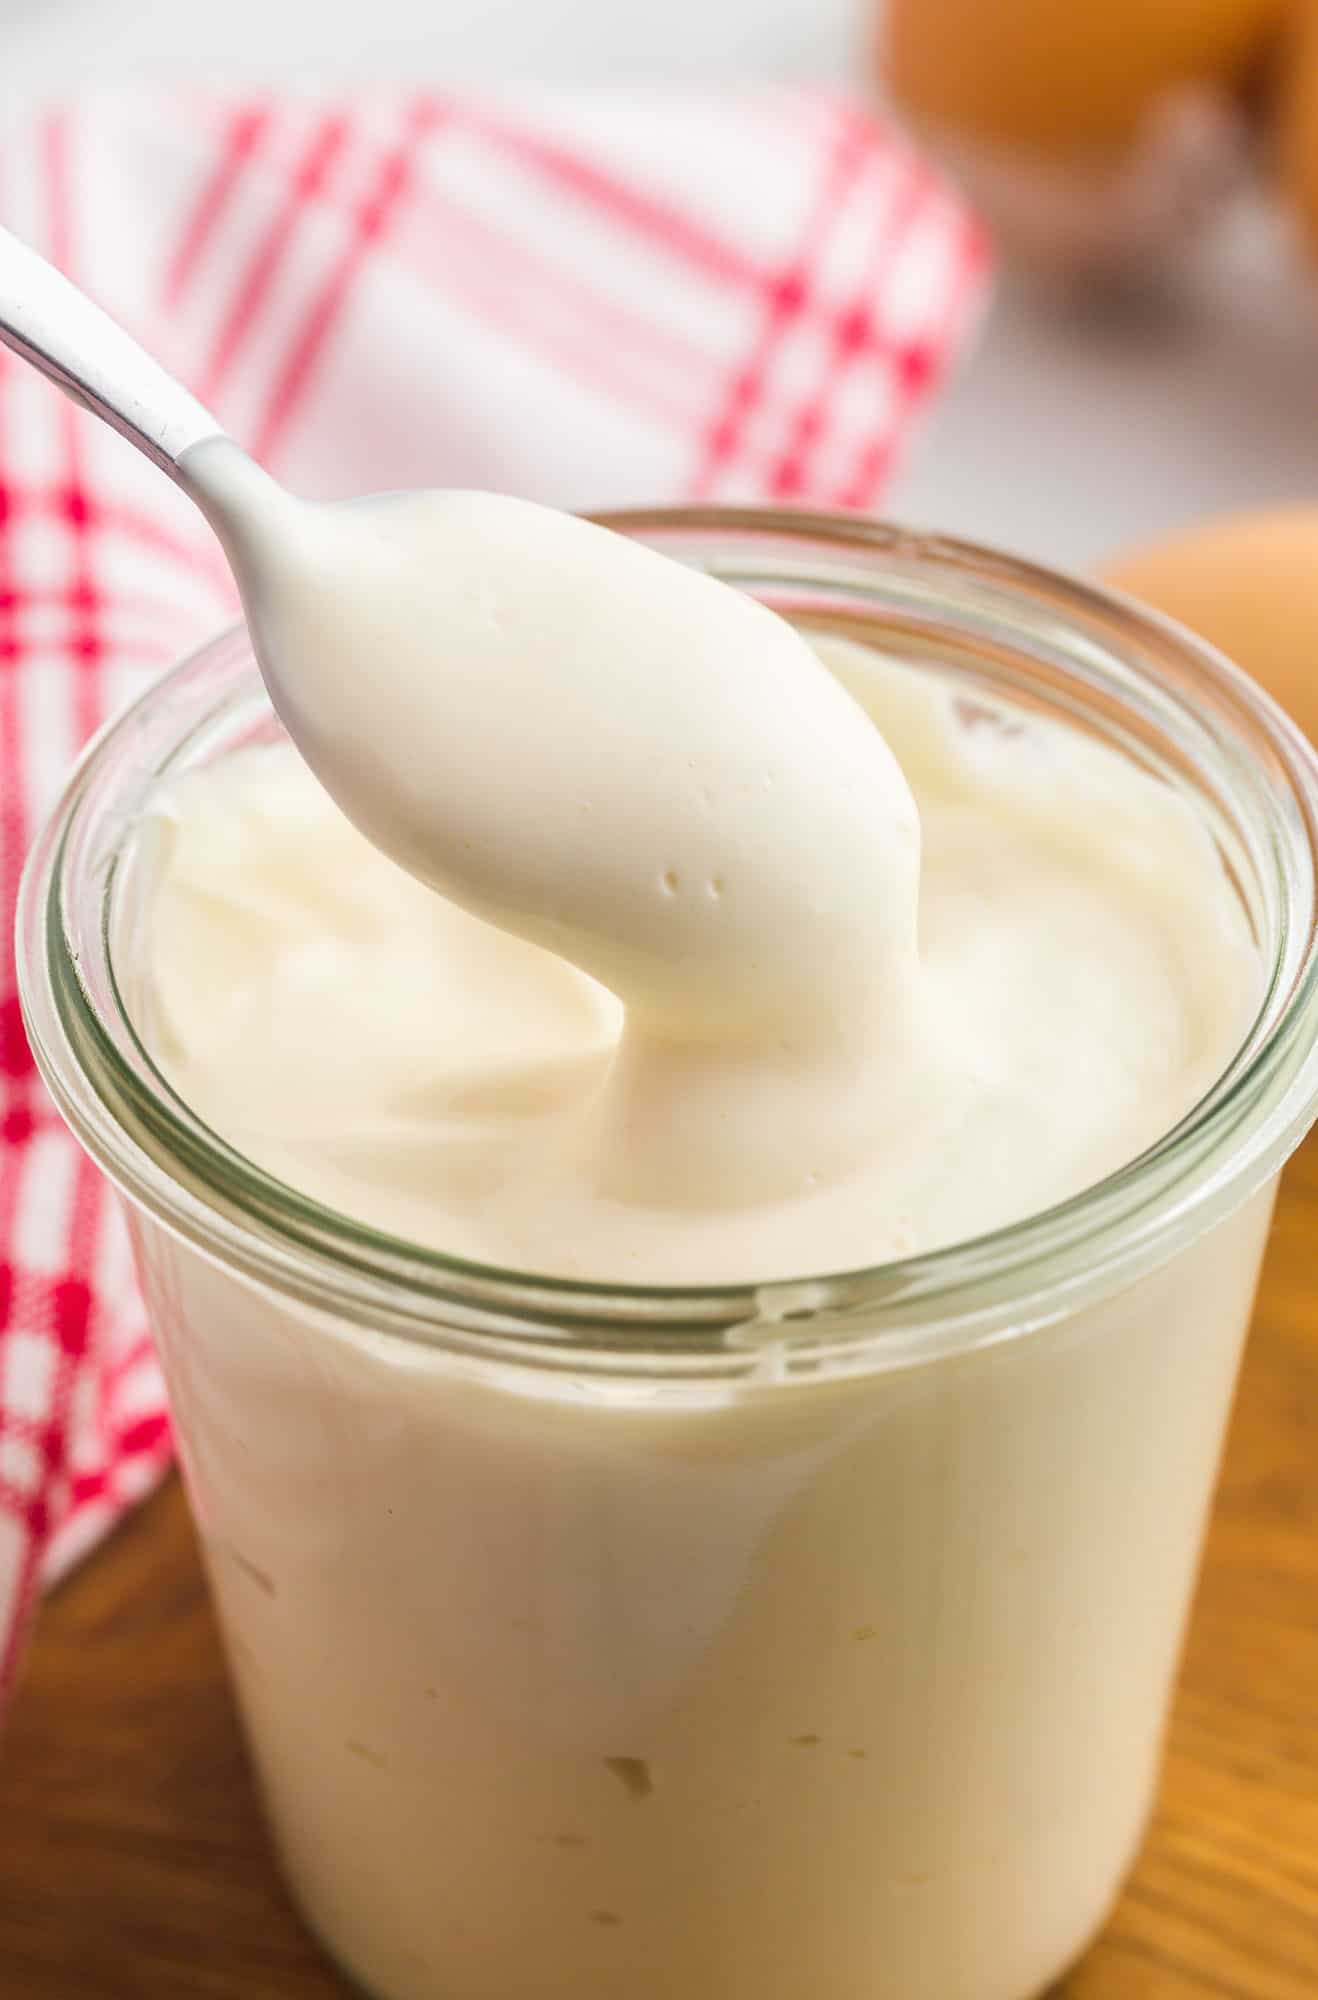 Homemade mayo in a glass Weck jar with a small spoon